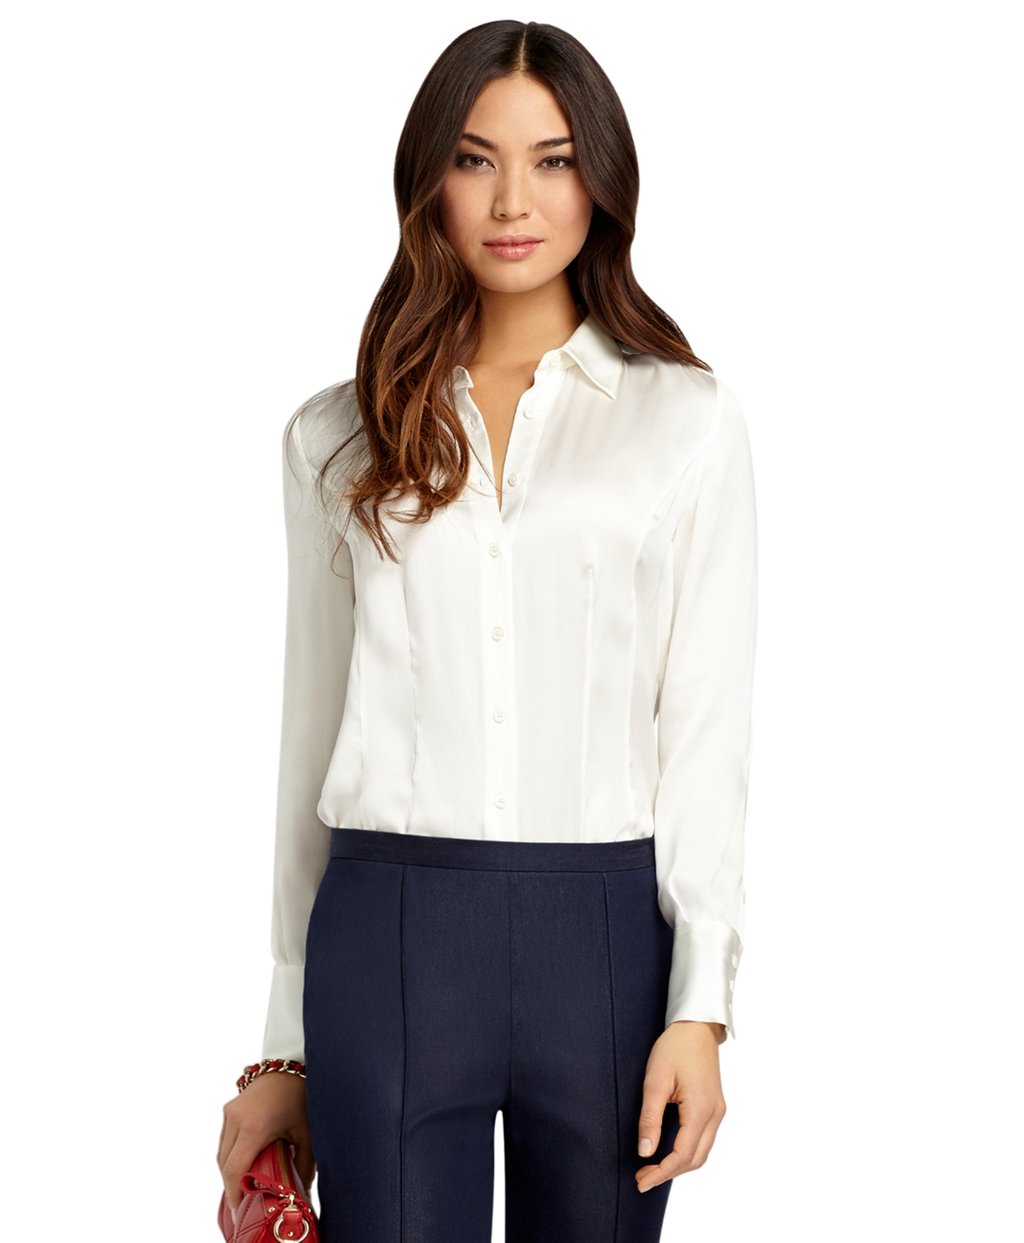 Lyst - Brooks brothers Petite Silk Georgette Blouse in White